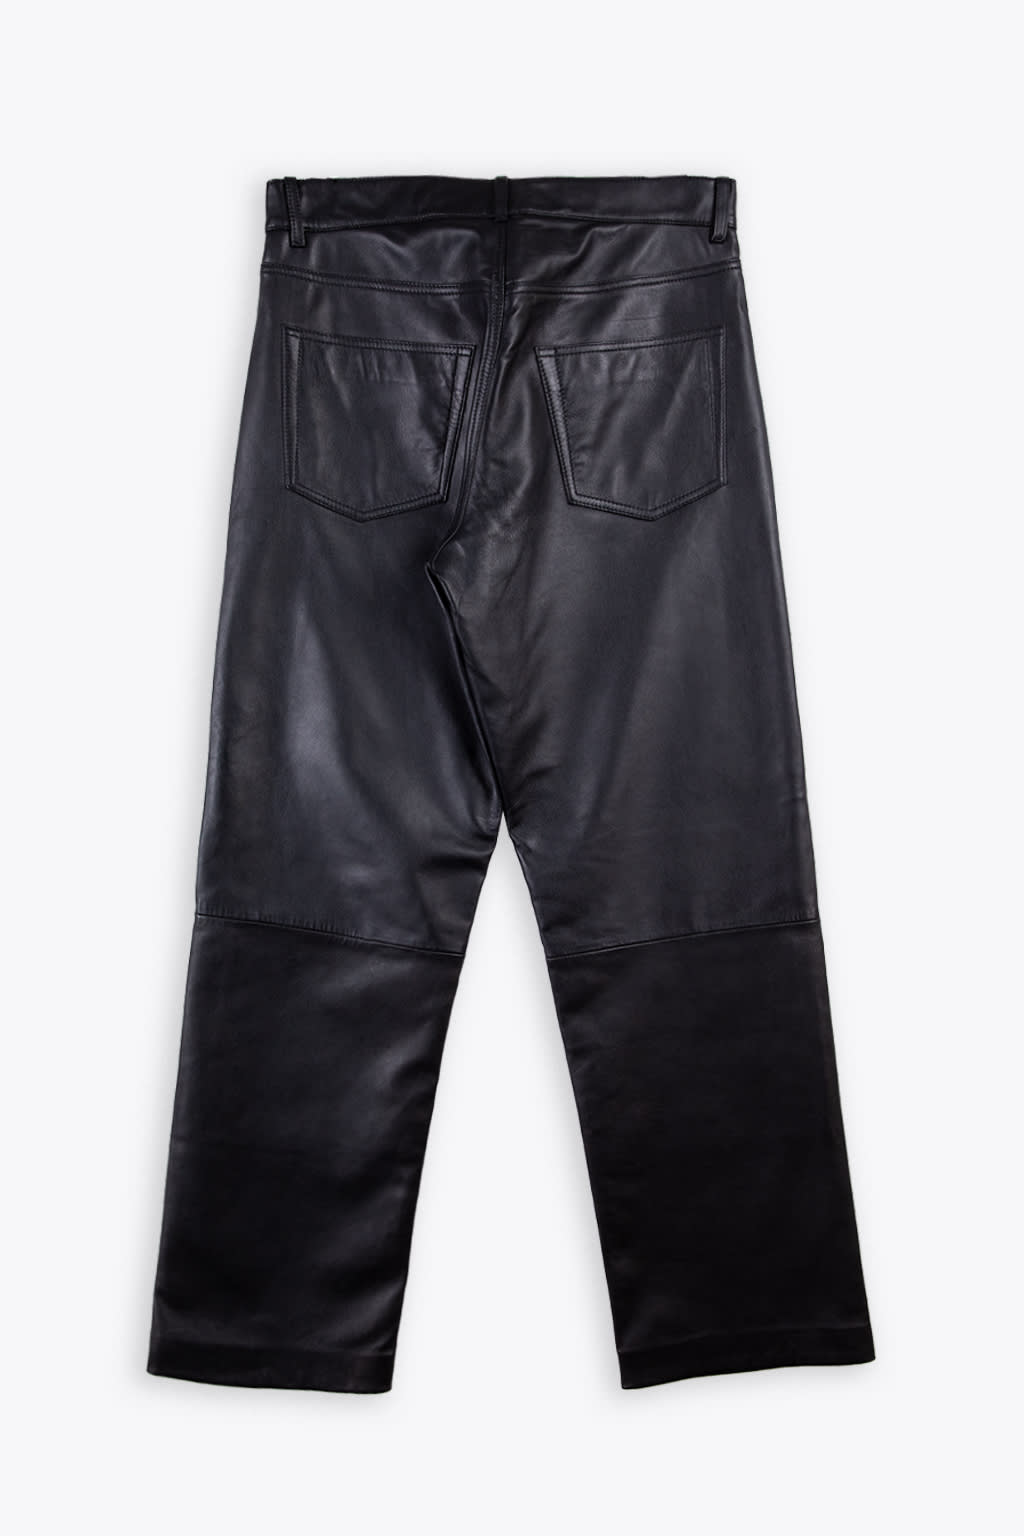 Shop Sunflower Loose Leather Black Leather Loose Pant - Loose Leather Pant